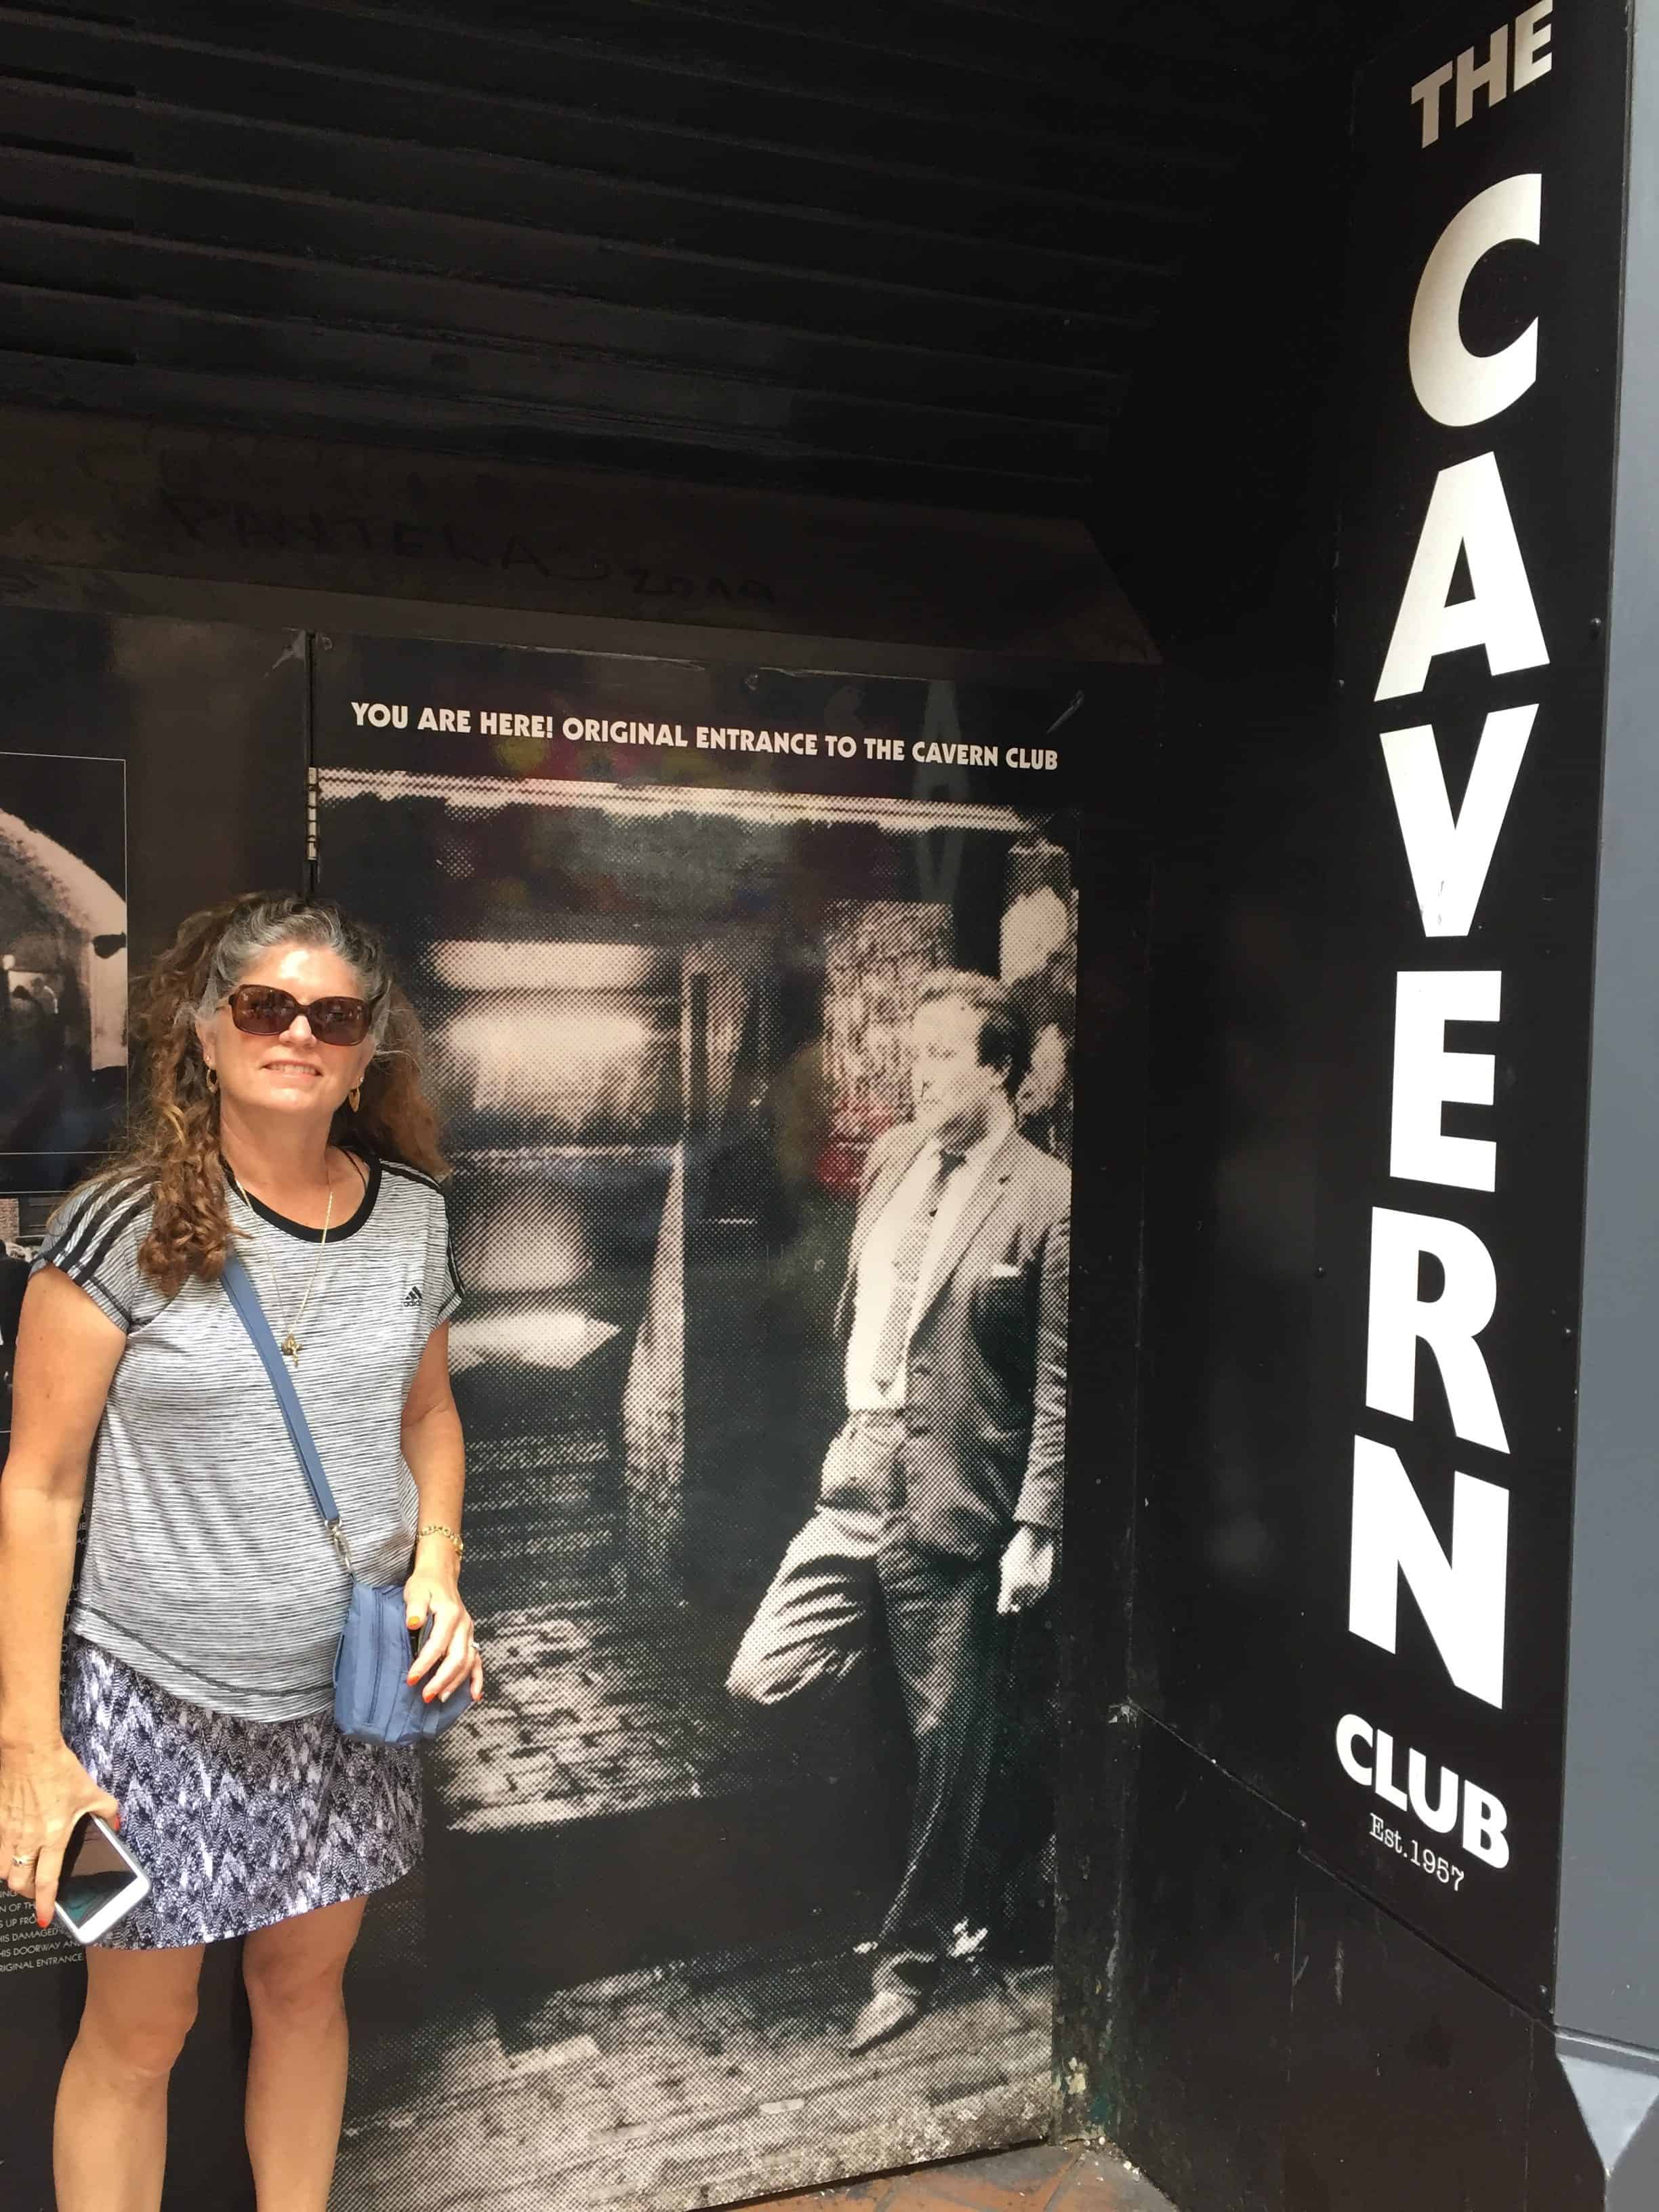 Outside the Cavern Club, Liverpool